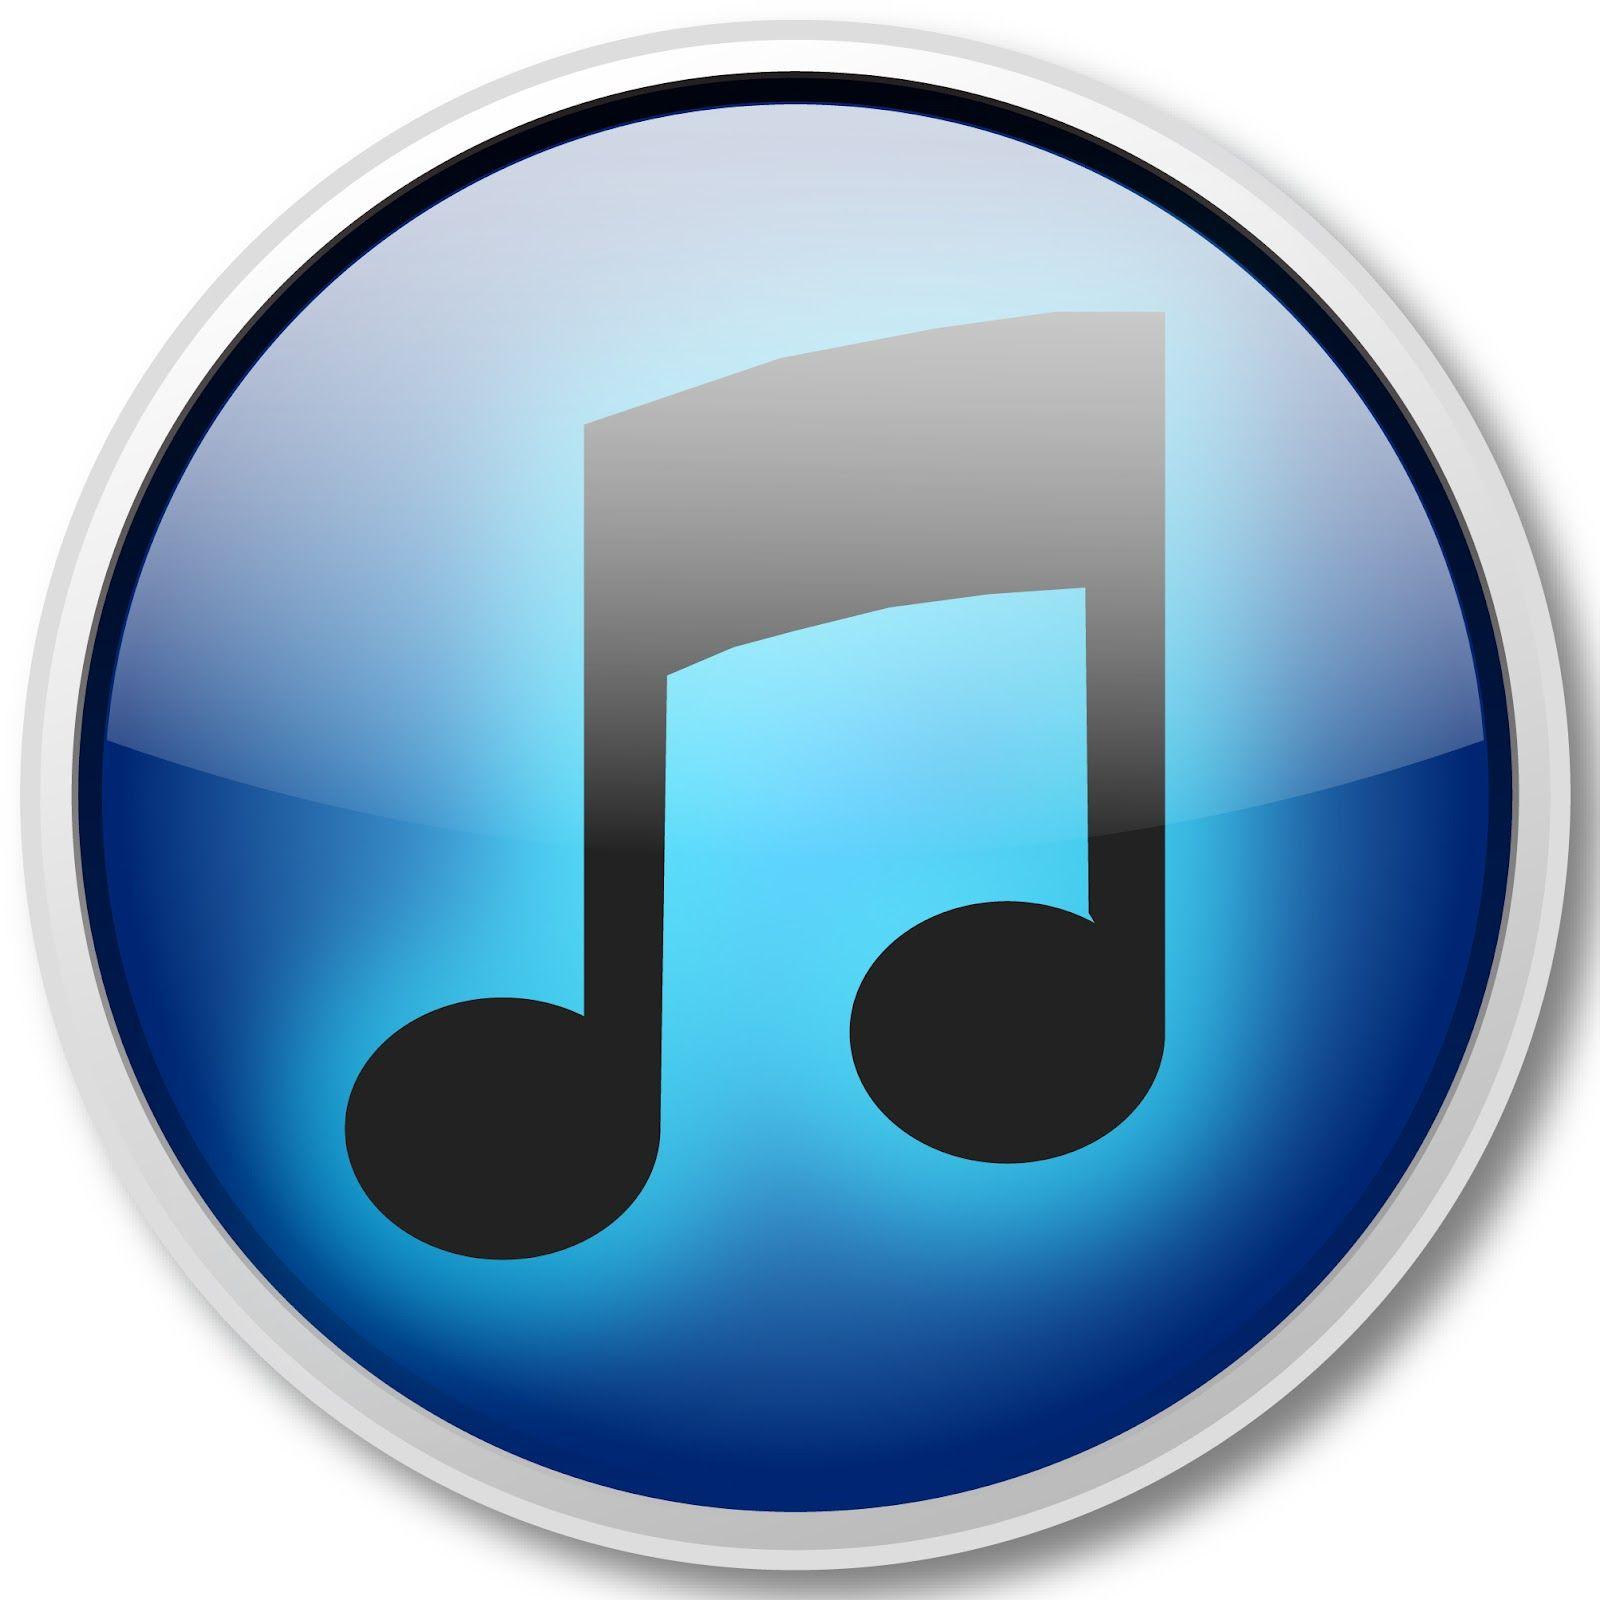 iTunes 12 Logo - iTunes Logo | Whims from Valadae